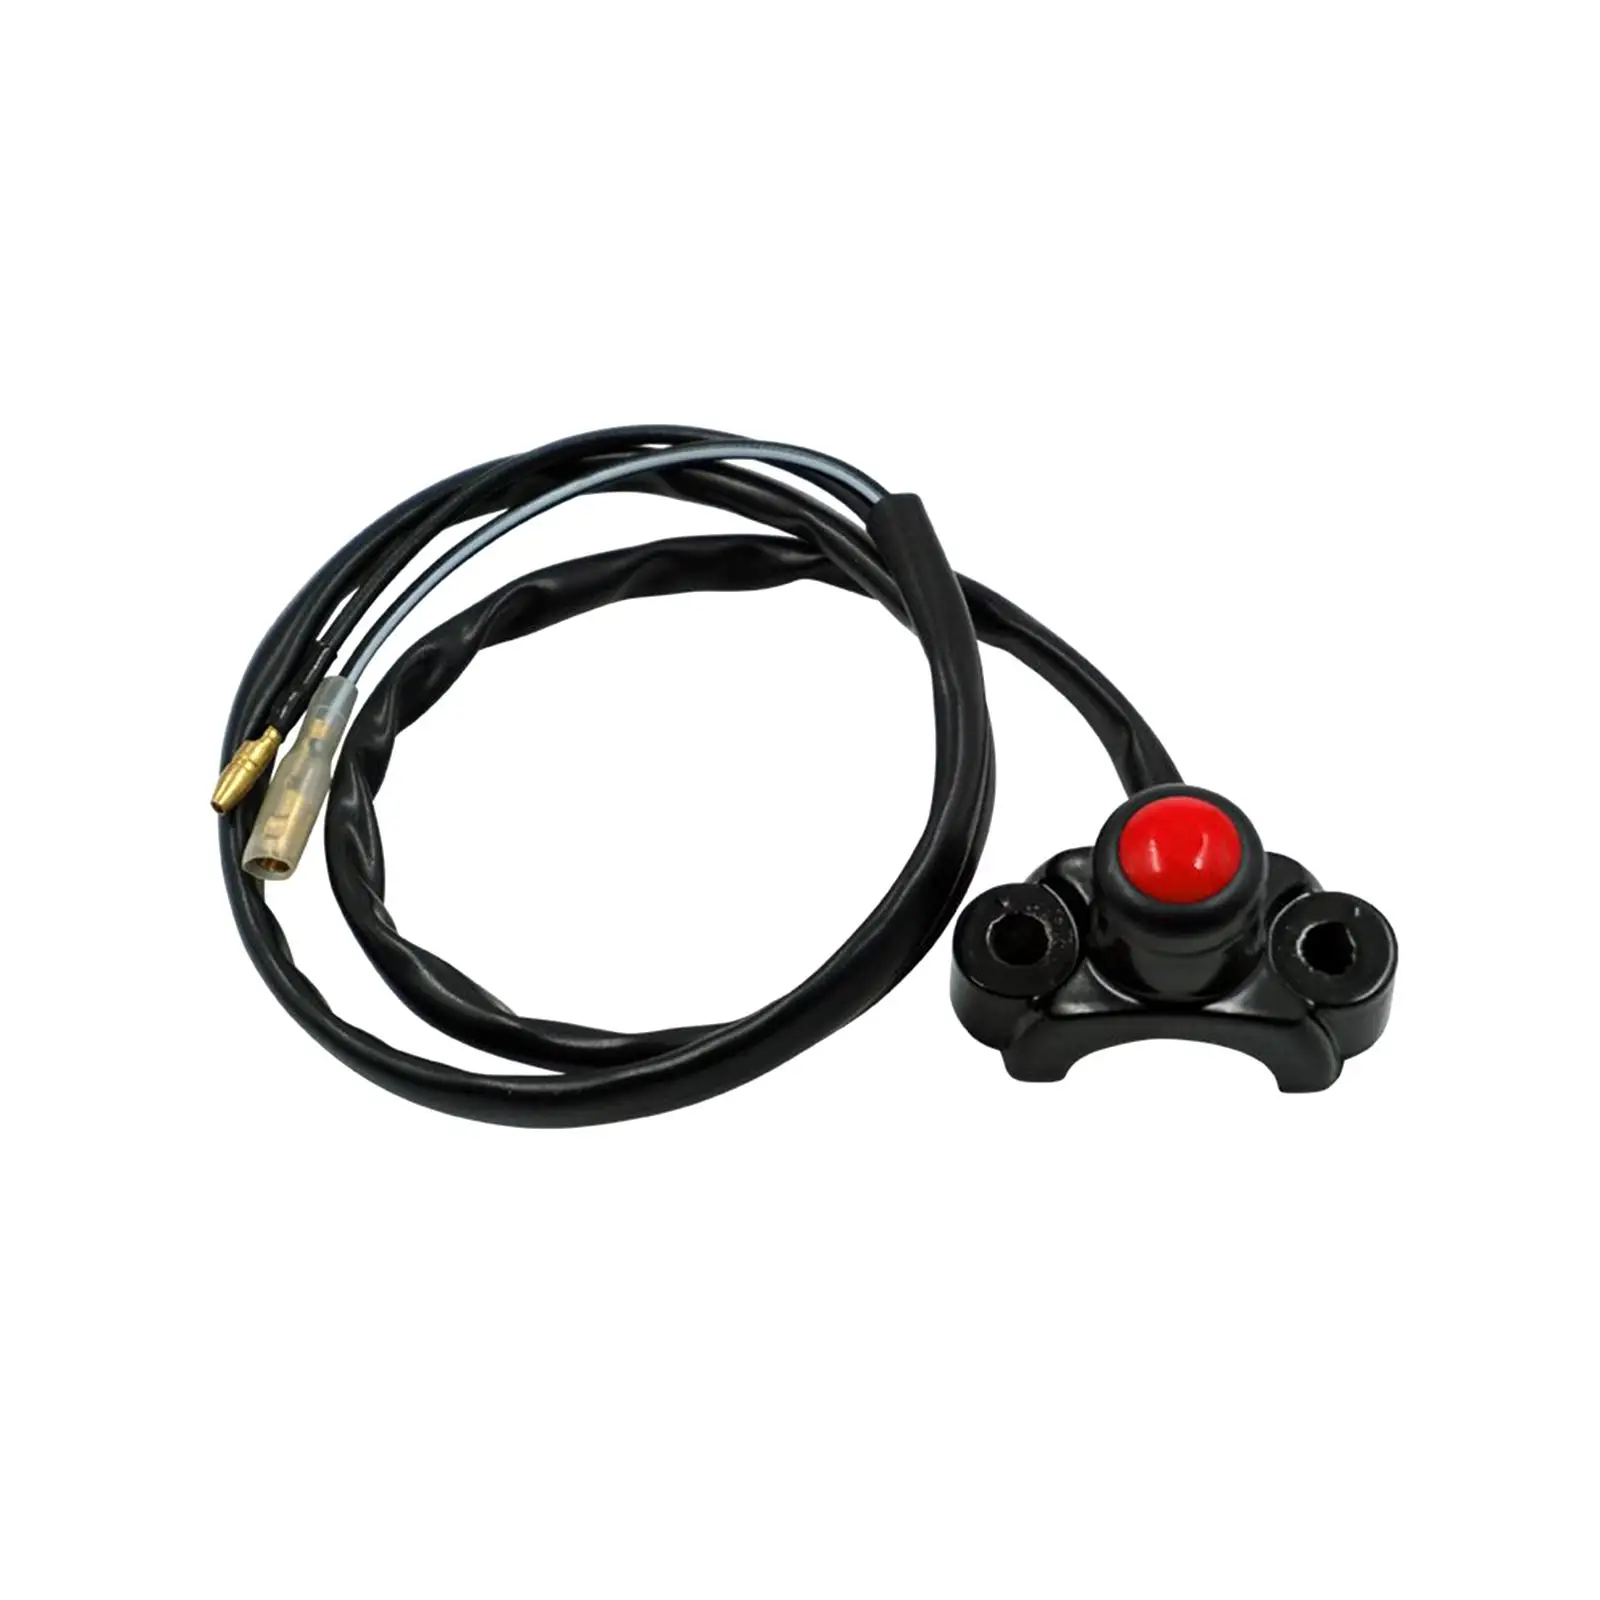 22mm 7/8in Motorcycle Handlebar Switch for Driving Running Bike